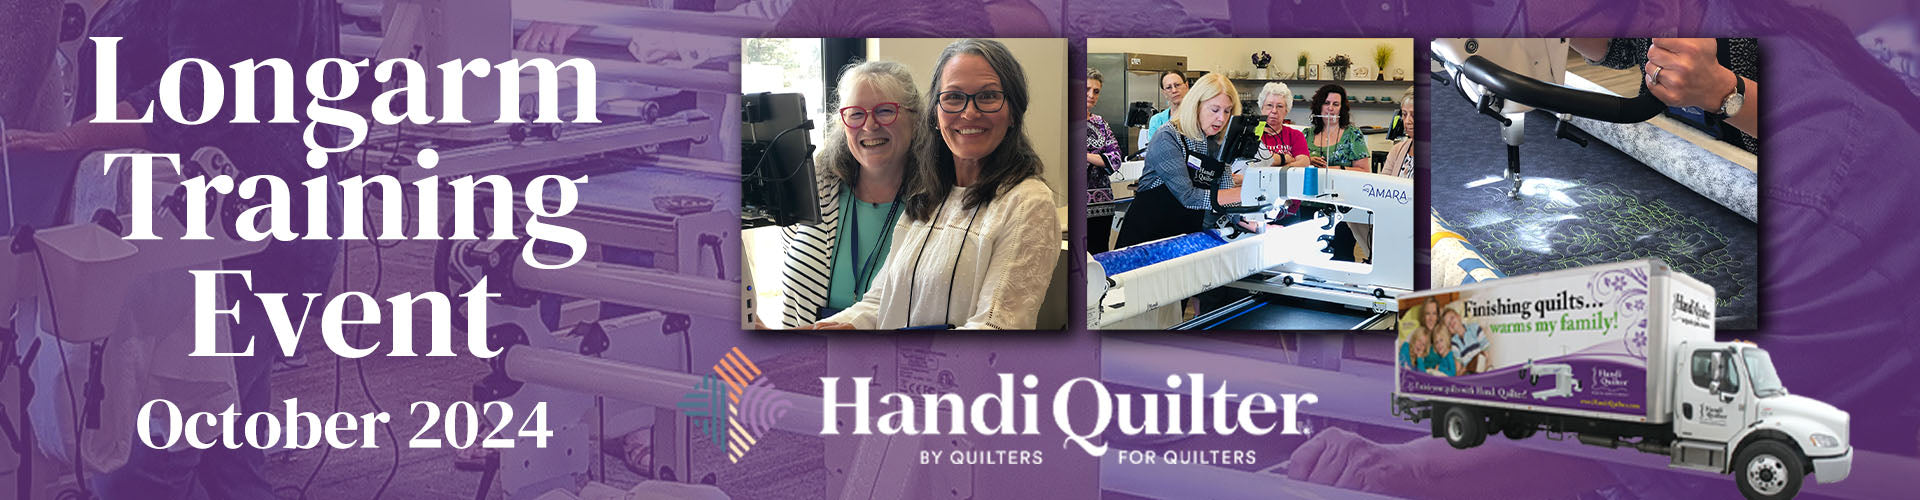 Handi Quilter Longarm Training Event - October 2024. Pictures of Students learning to longarm quilt. Handi Quilter logo. Handi Quilter delivery truck.